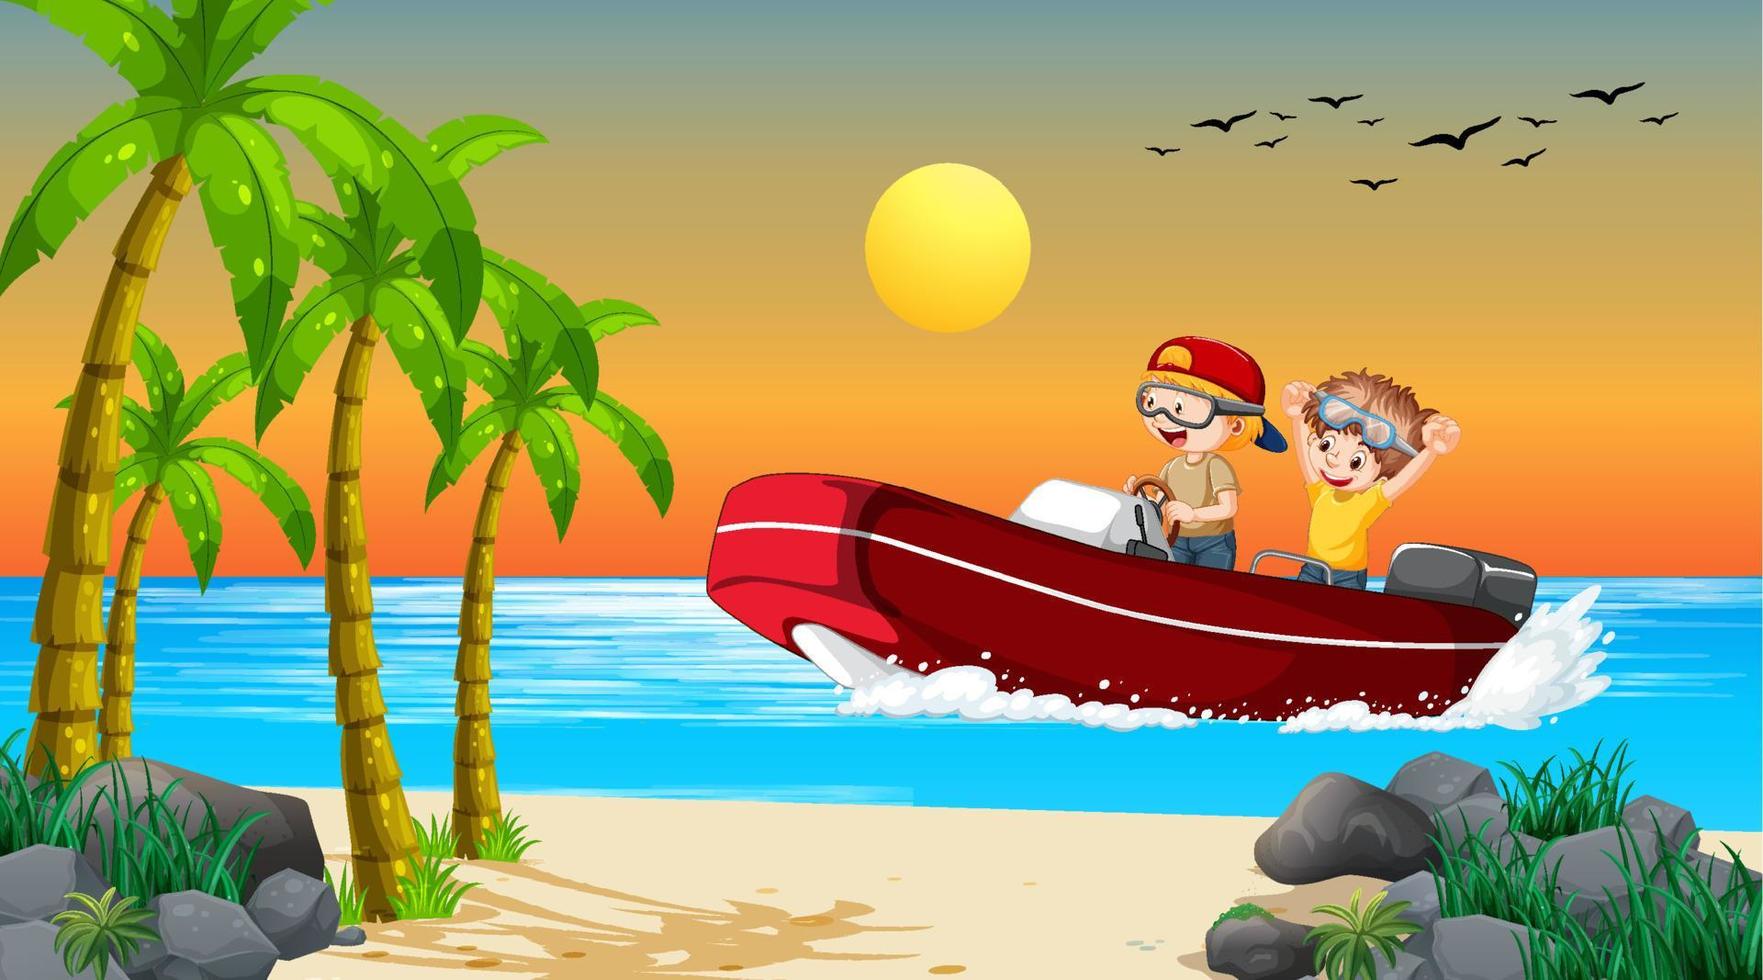 Ocean wave scenery with a boy driving boat with his friends vector